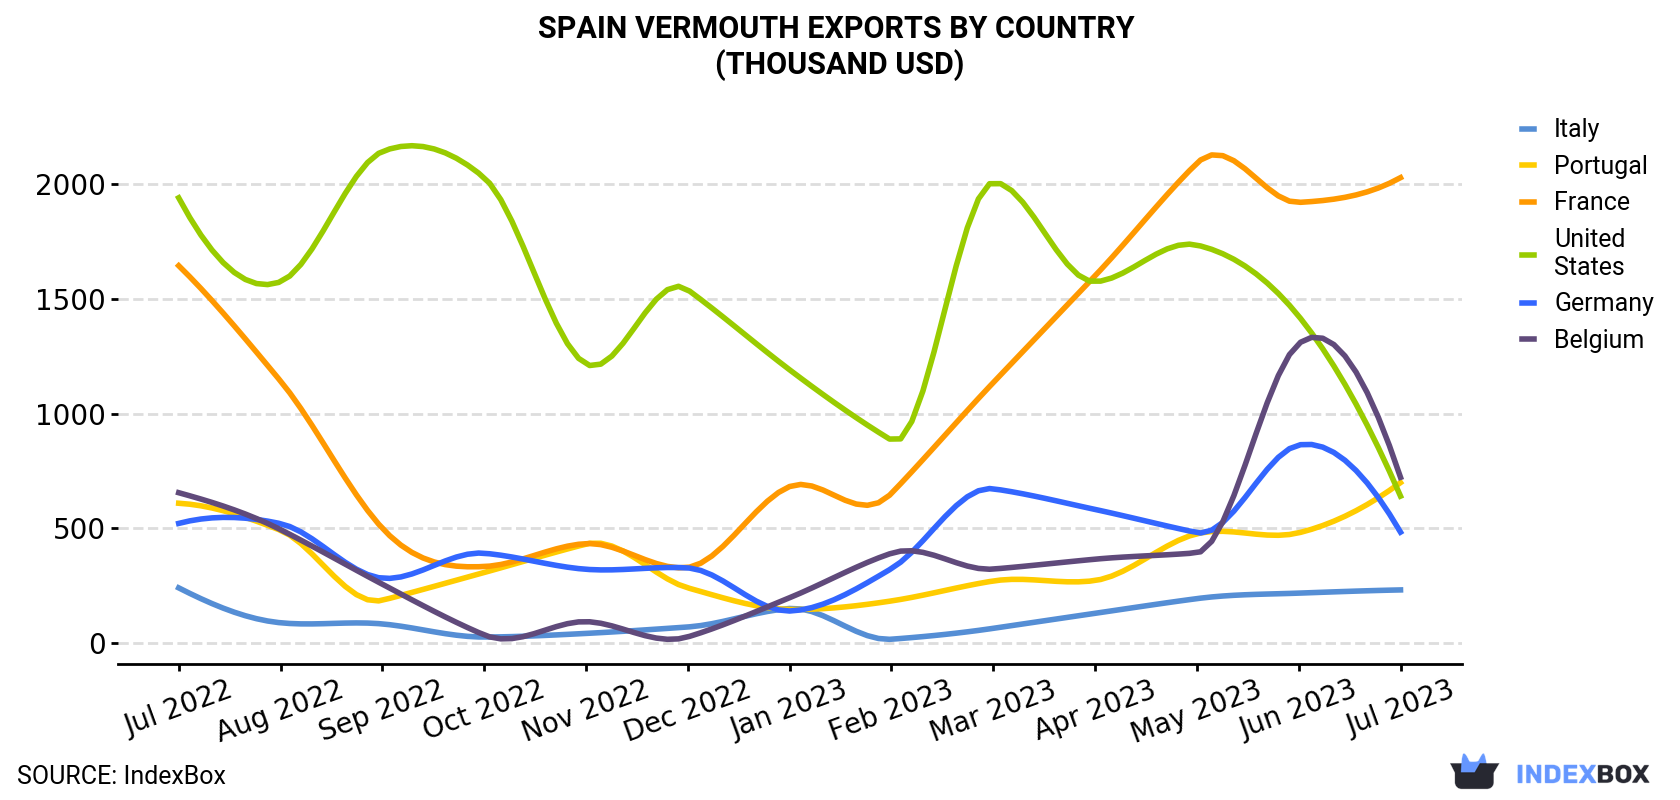 Spain Vermouth Exports By Country (Thousand USD)